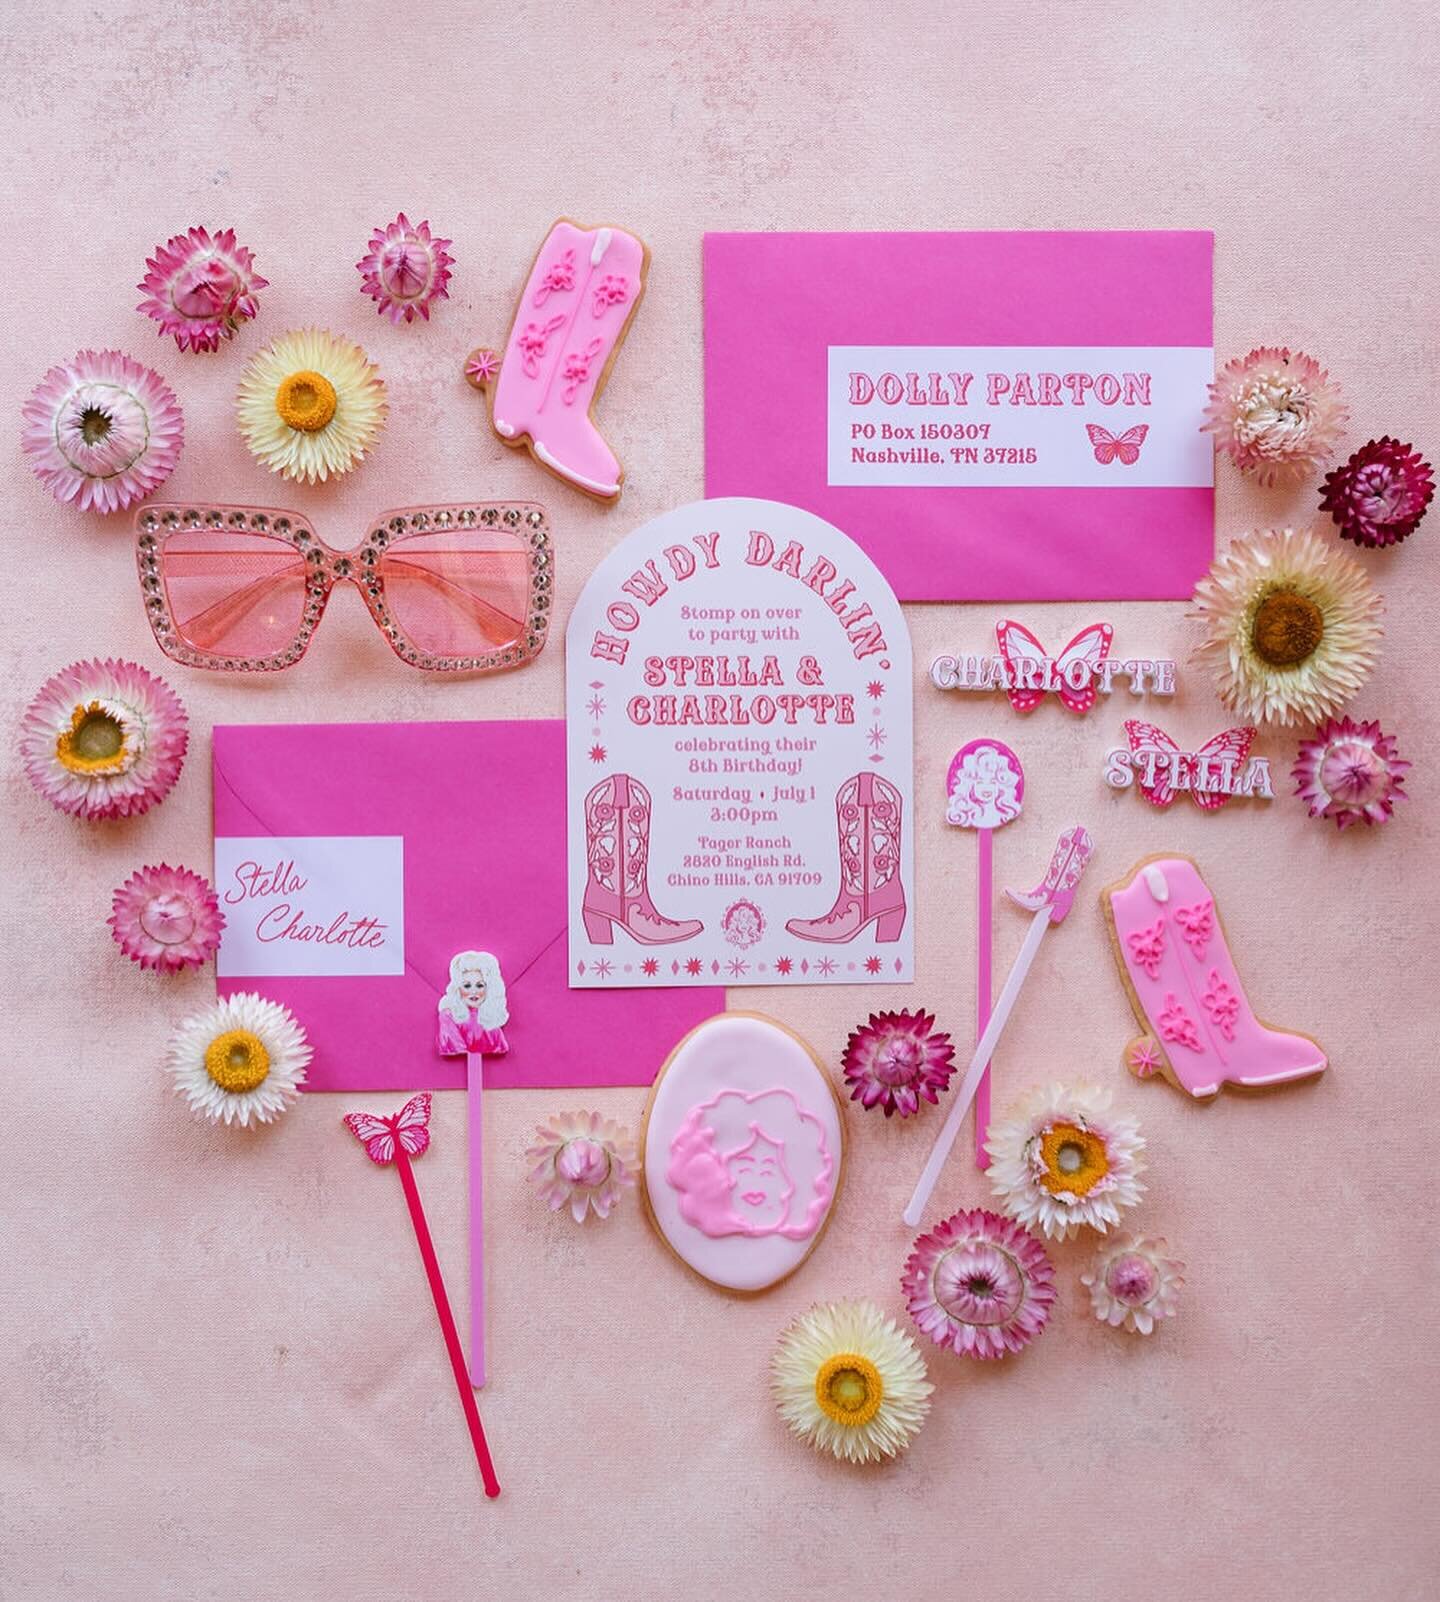 Remembering all the darling details from this party Dolly&rsquo;s birthday today! Happy birthday @dollyparton!

Vendors - Design &amp; Planning - @beijosevents / Photographer - @alisonbernier / Invite, Signage &amp; Details Design - @chelceacreative 